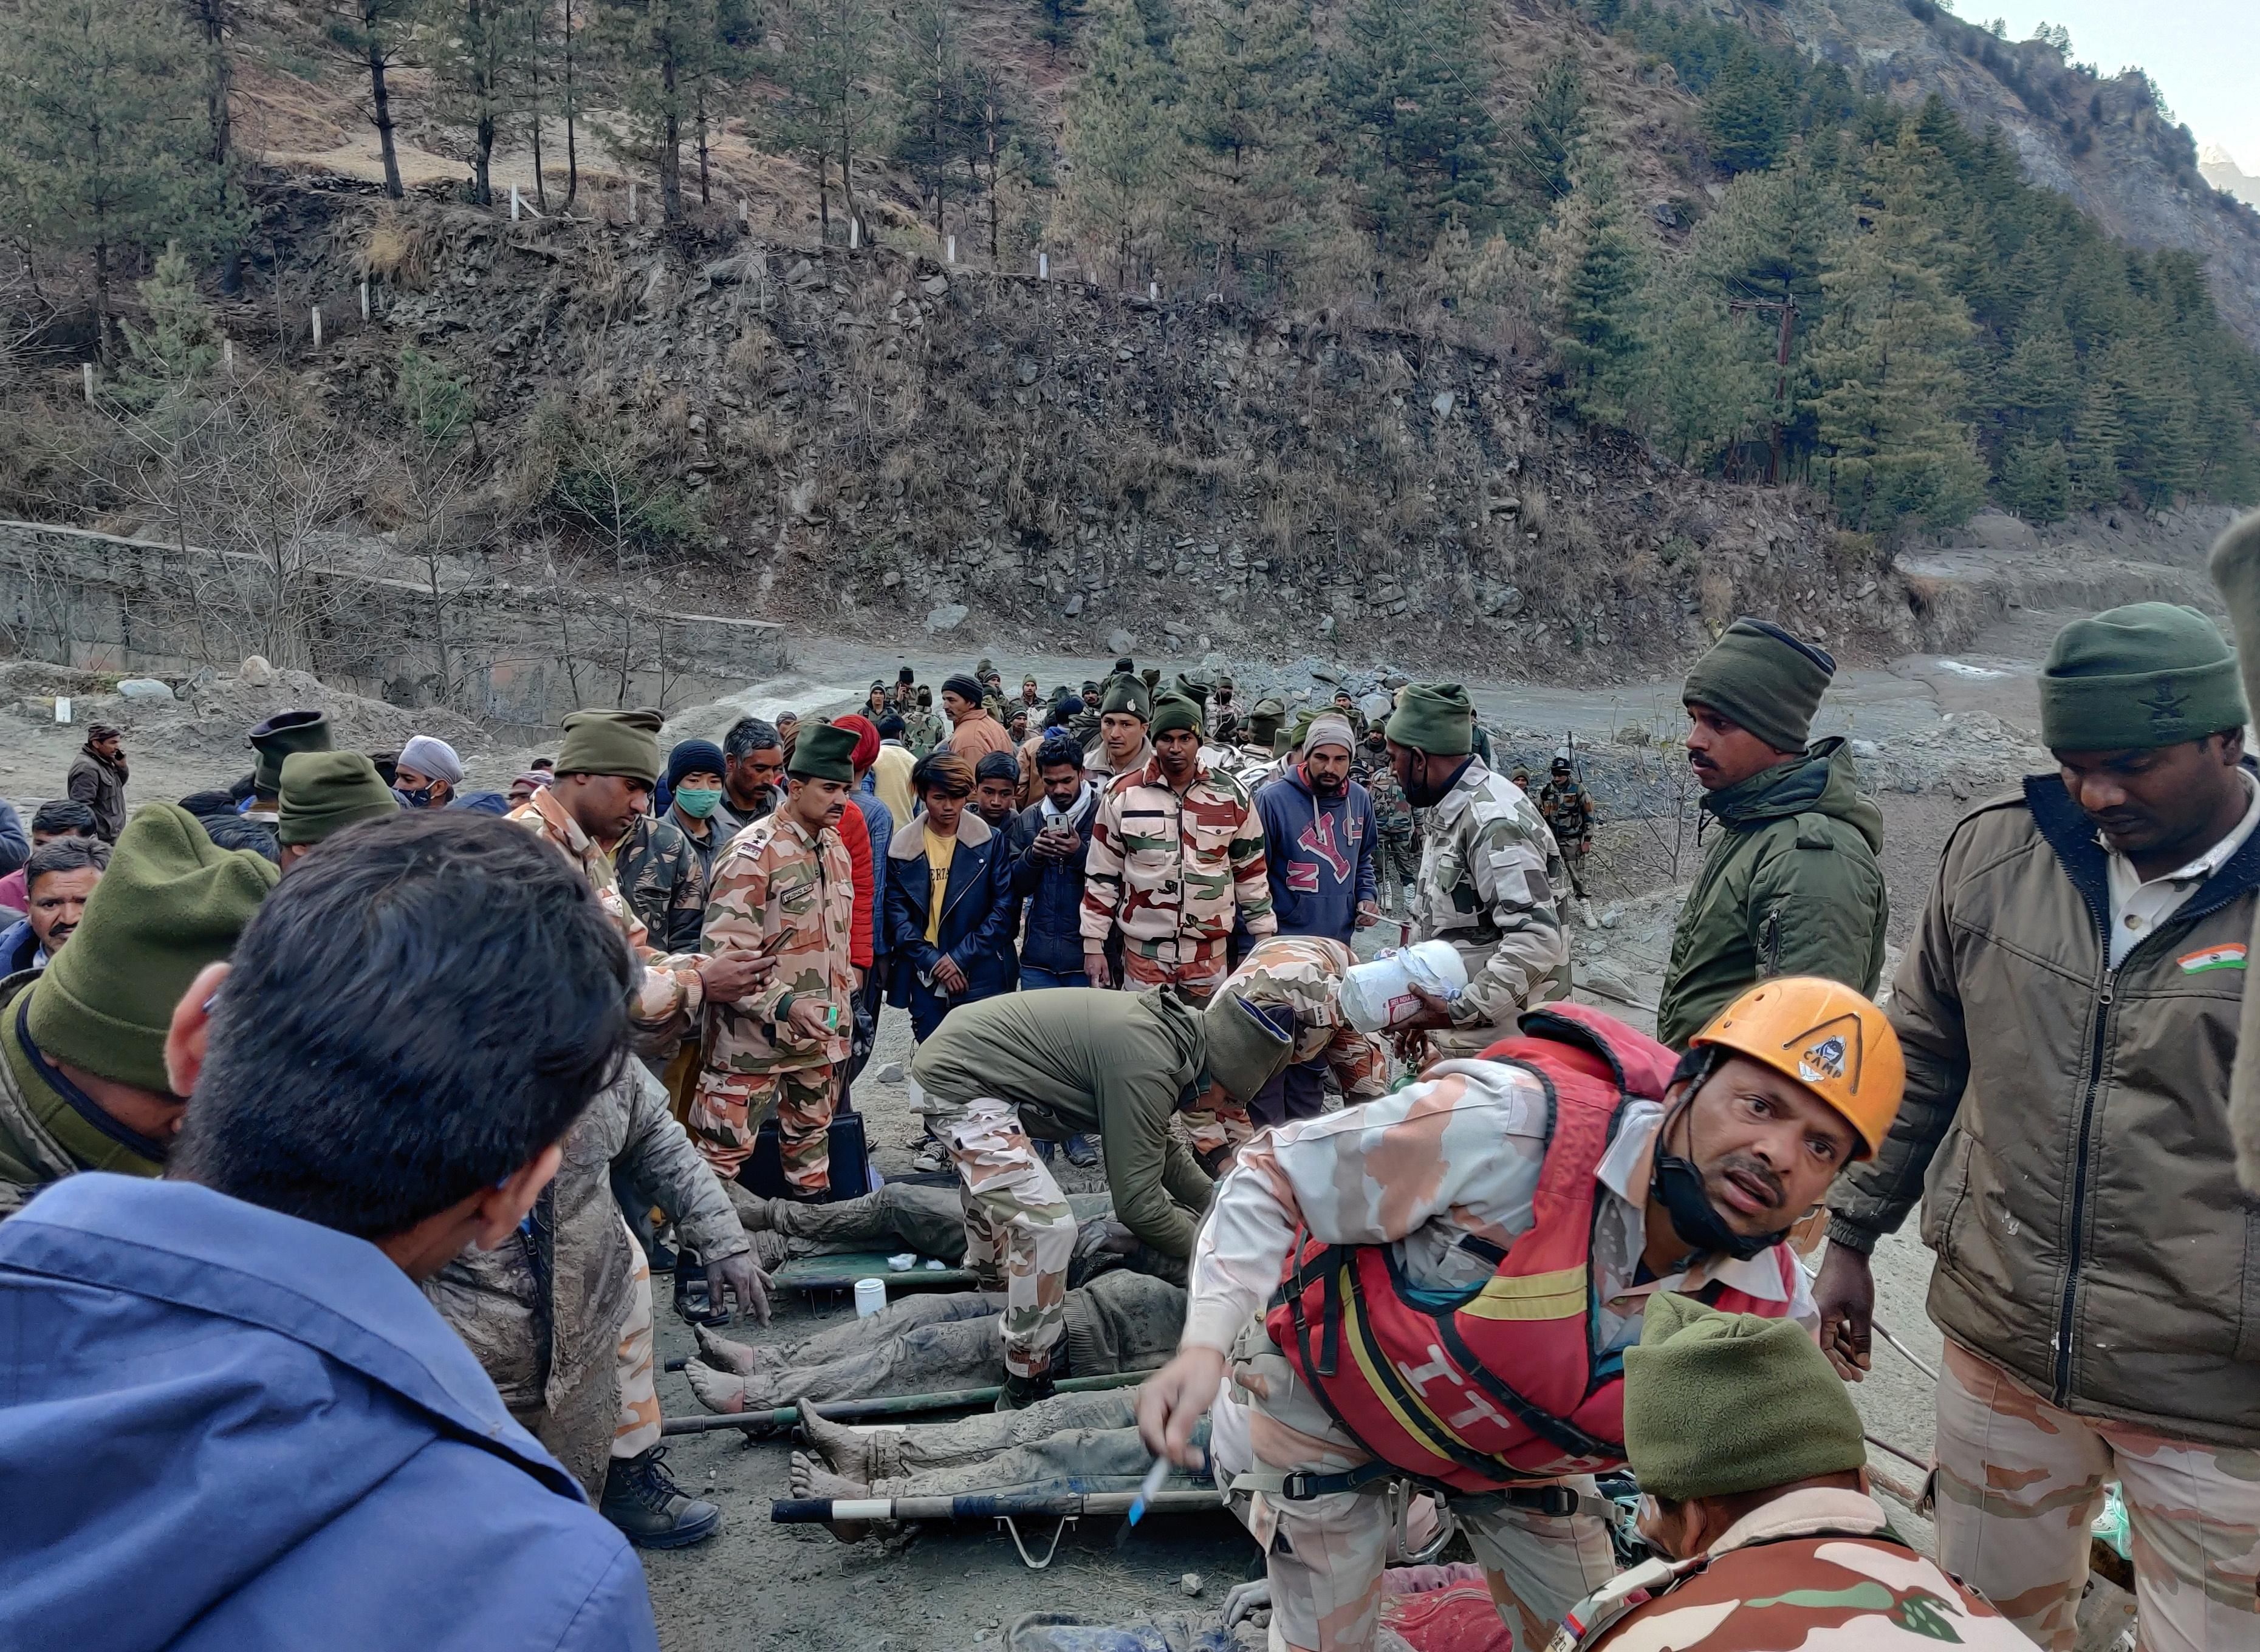 Members of Indo-Tibetan Border Police (ITBP) tend to people rescued after a Himalayan glacier broke and swept away a small hydroelectric dam, in Chormi village in Tapovan in the northern state of Uttarakhand, India, February 7, 2021.